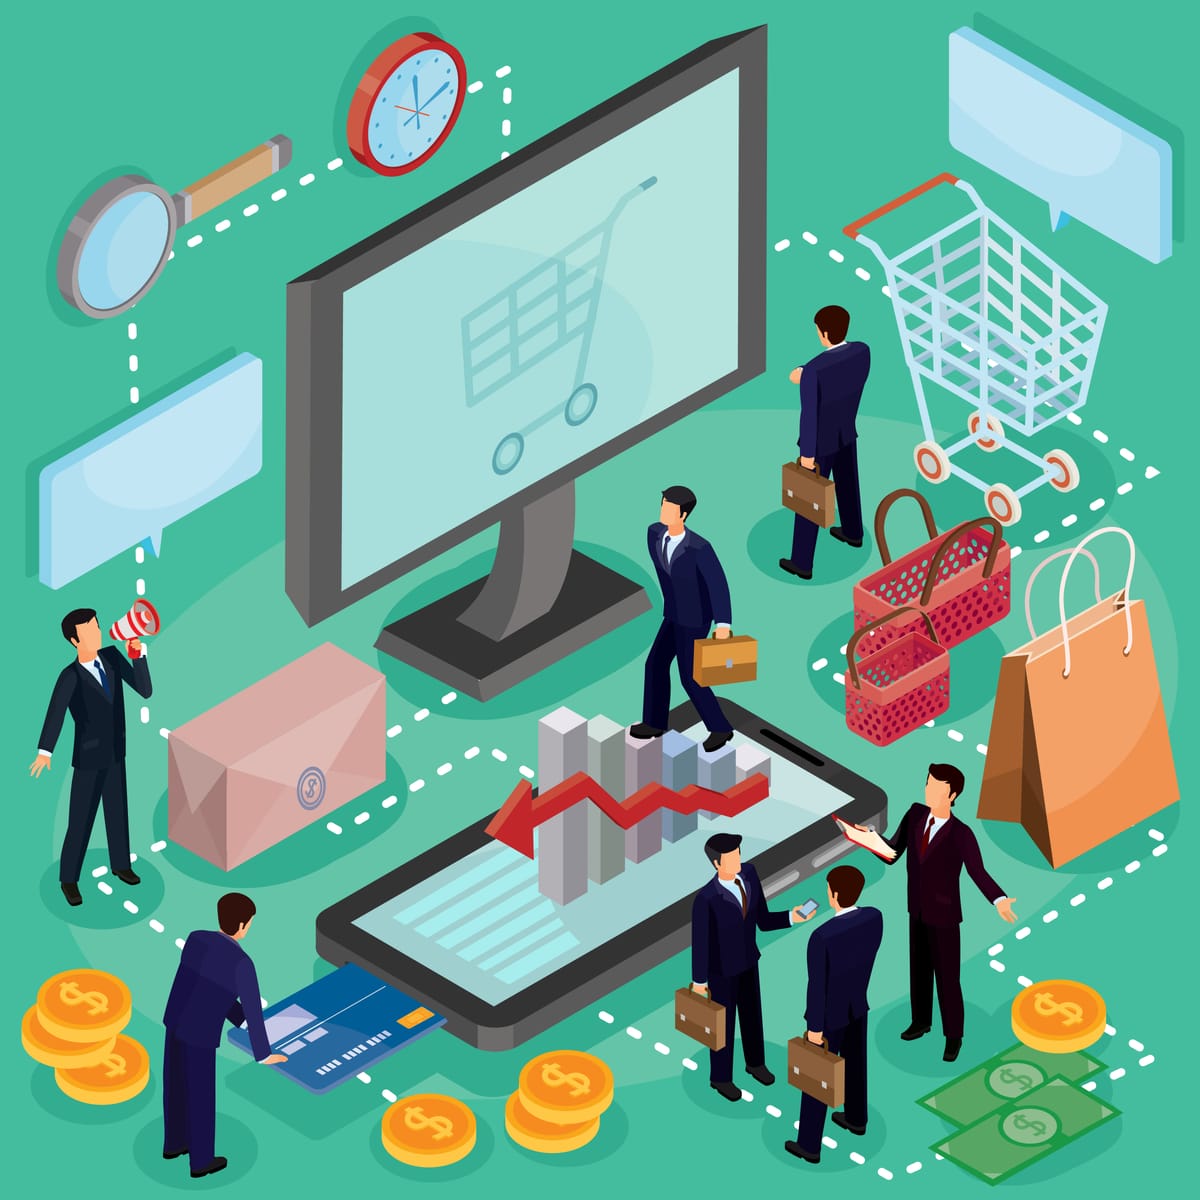 Using Market Intelligence to Anticipate Disruption in Retail